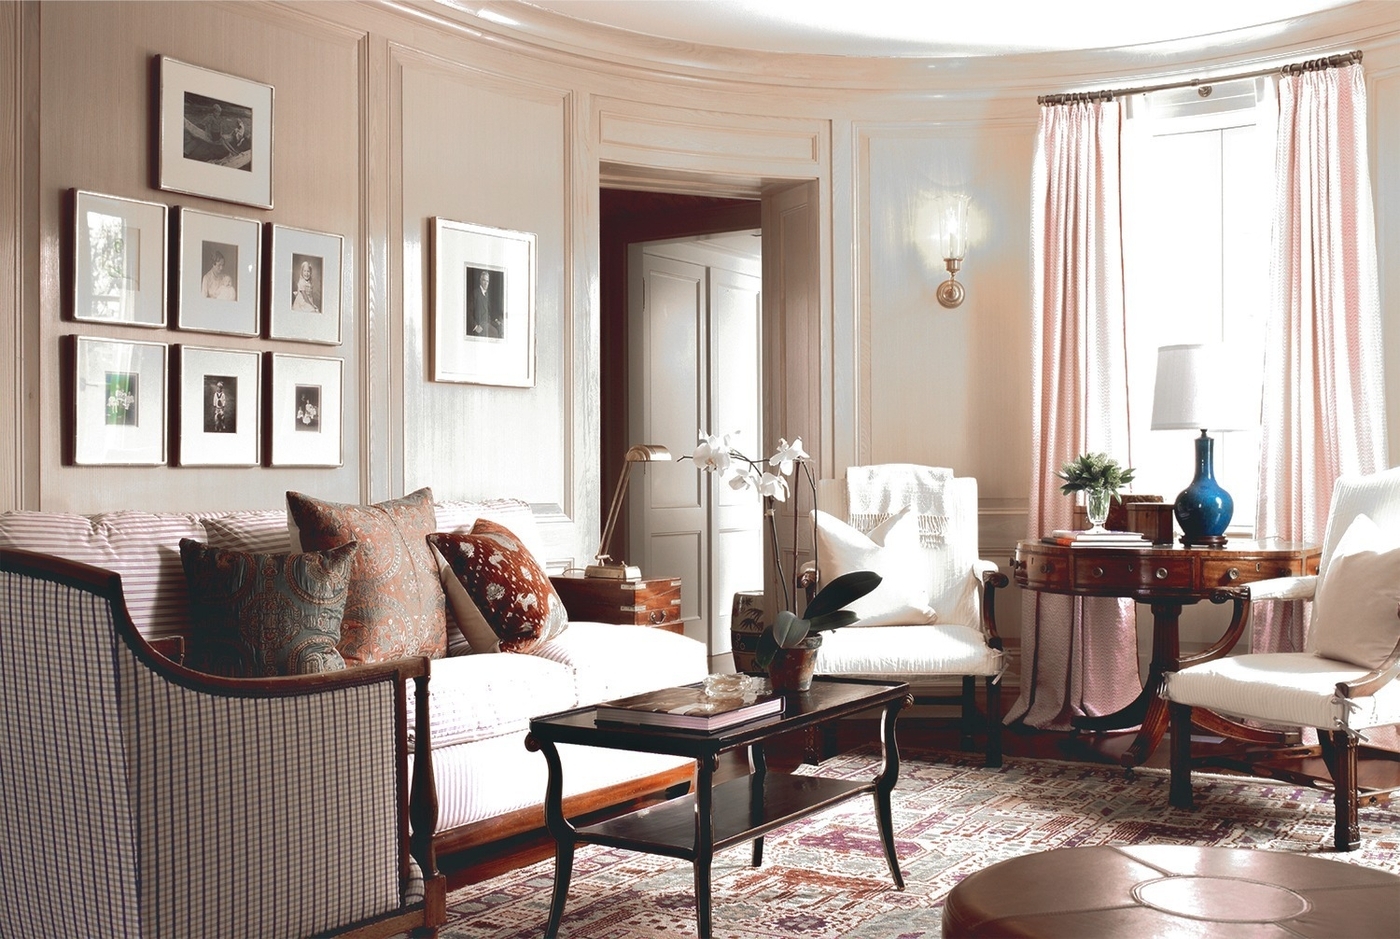 Art Deco Interior Design: A Guide to Help You Master This Ever-Popular Style